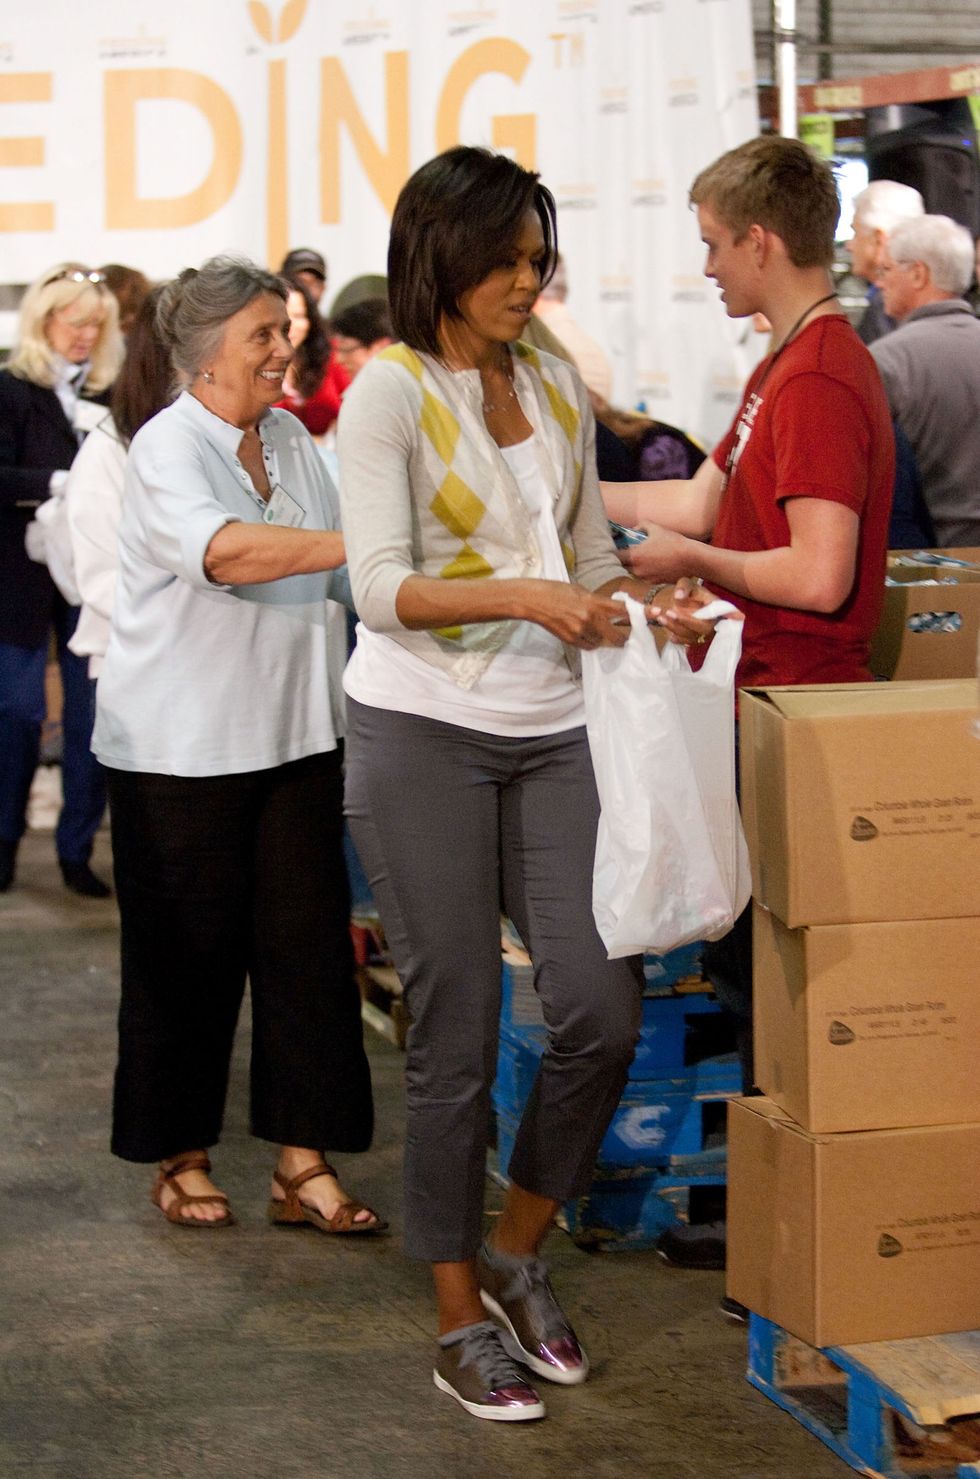 <p><strong data-verified="redactor" data-redactor-tag="strong">When: </strong>April 29, 2009</p>

<p><strong data-verified="redactor" data-redactor-tag="strong">Where: </strong>The Capitol Area Food Bank for Feeding America in Washington, DC</p>

<p><strong data-verified="redactor" data-redactor-tag="strong">Wearing: </strong>An argyle cardigan and Lanvin sneakers</p>

<p><strong data-verified="redactor" data-redactor-tag="strong"></strong><strong data-verified="redactor" data-redactor-tag="strong">Why it mattered: </strong>Not even Michelle can evade the occasional misstep. In 2009 she drew the ire of certain media outlets when she wore $540 Lanvin sneakers to volunteer at a food bank.</p>